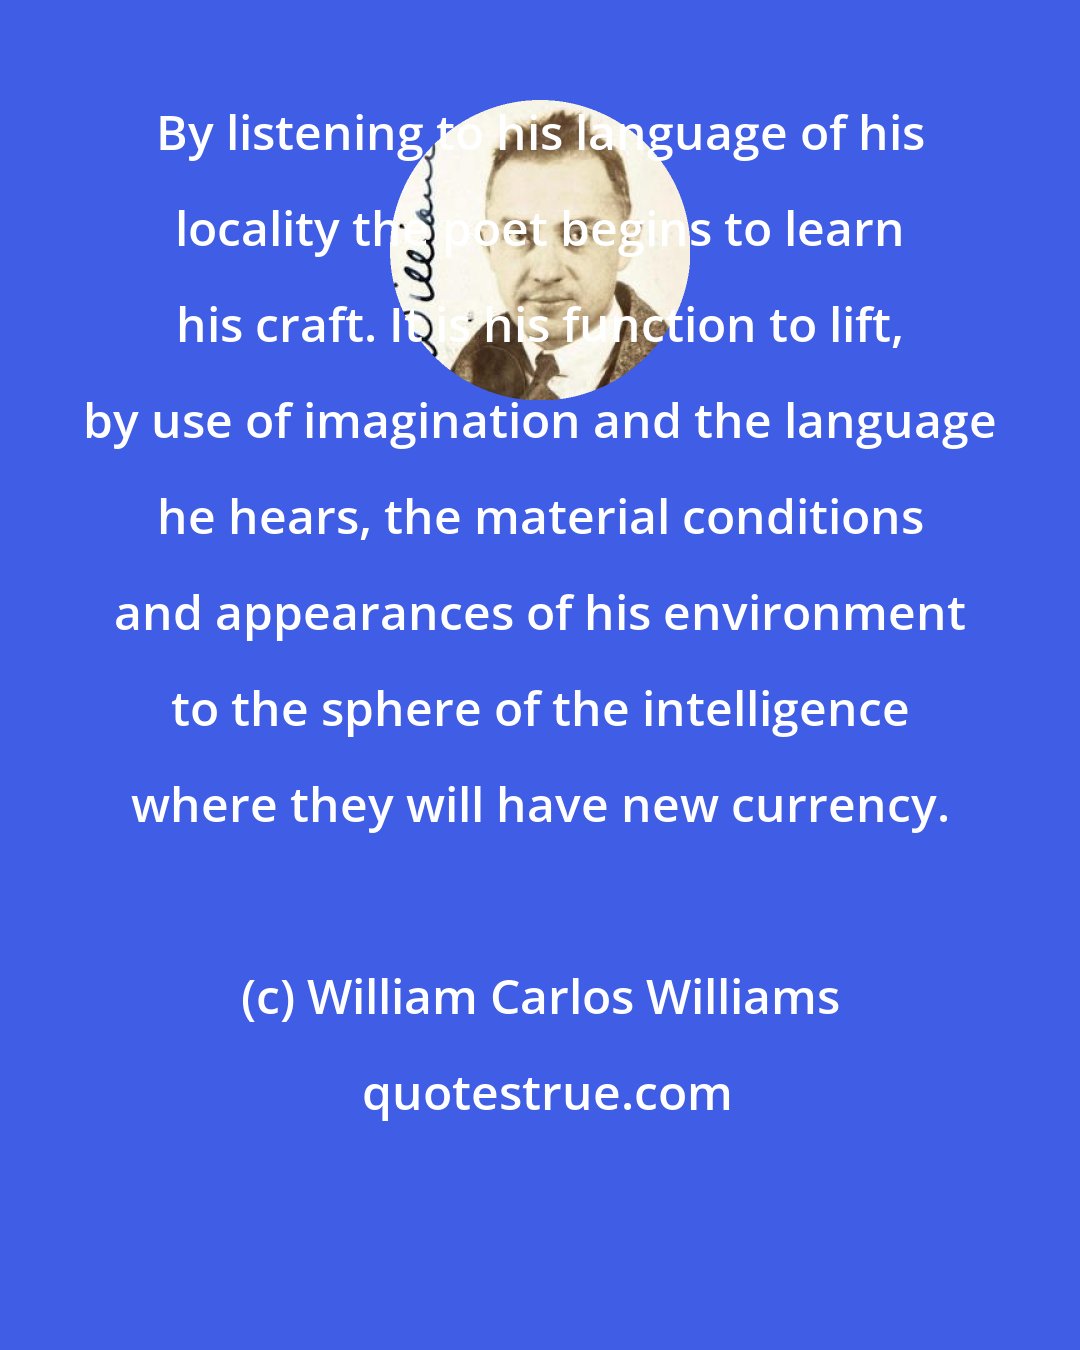 William Carlos Williams: By listening to his language of his locality the poet begins to learn his craft. It is his function to lift, by use of imagination and the language he hears, the material conditions and appearances of his environment to the sphere of the intelligence where they will have new currency.